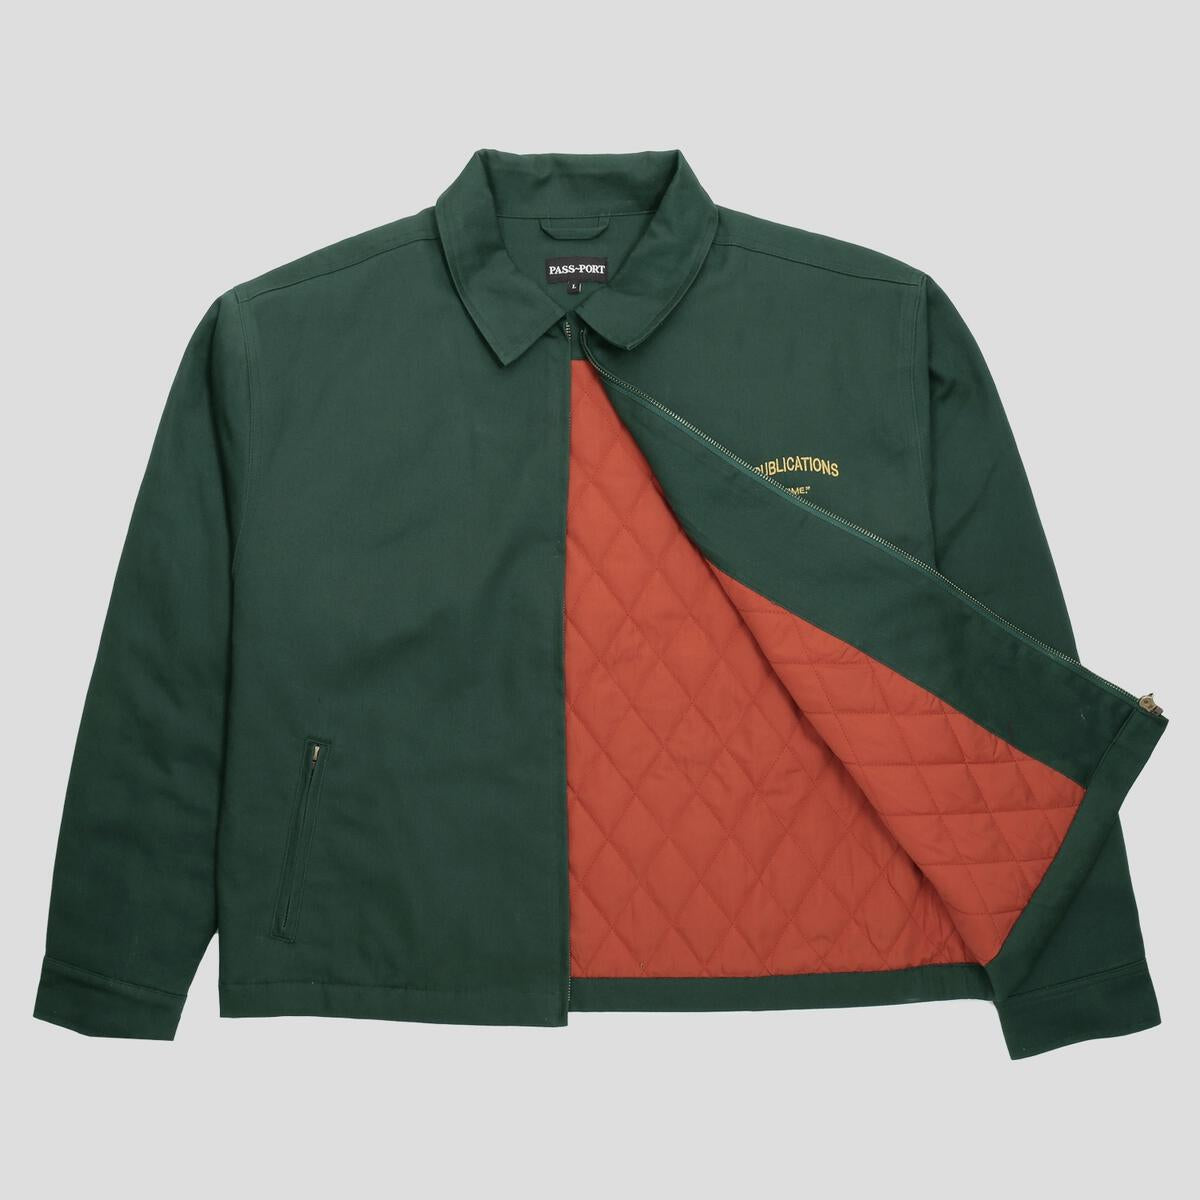 Publish Workers Jacket (Forest Green)